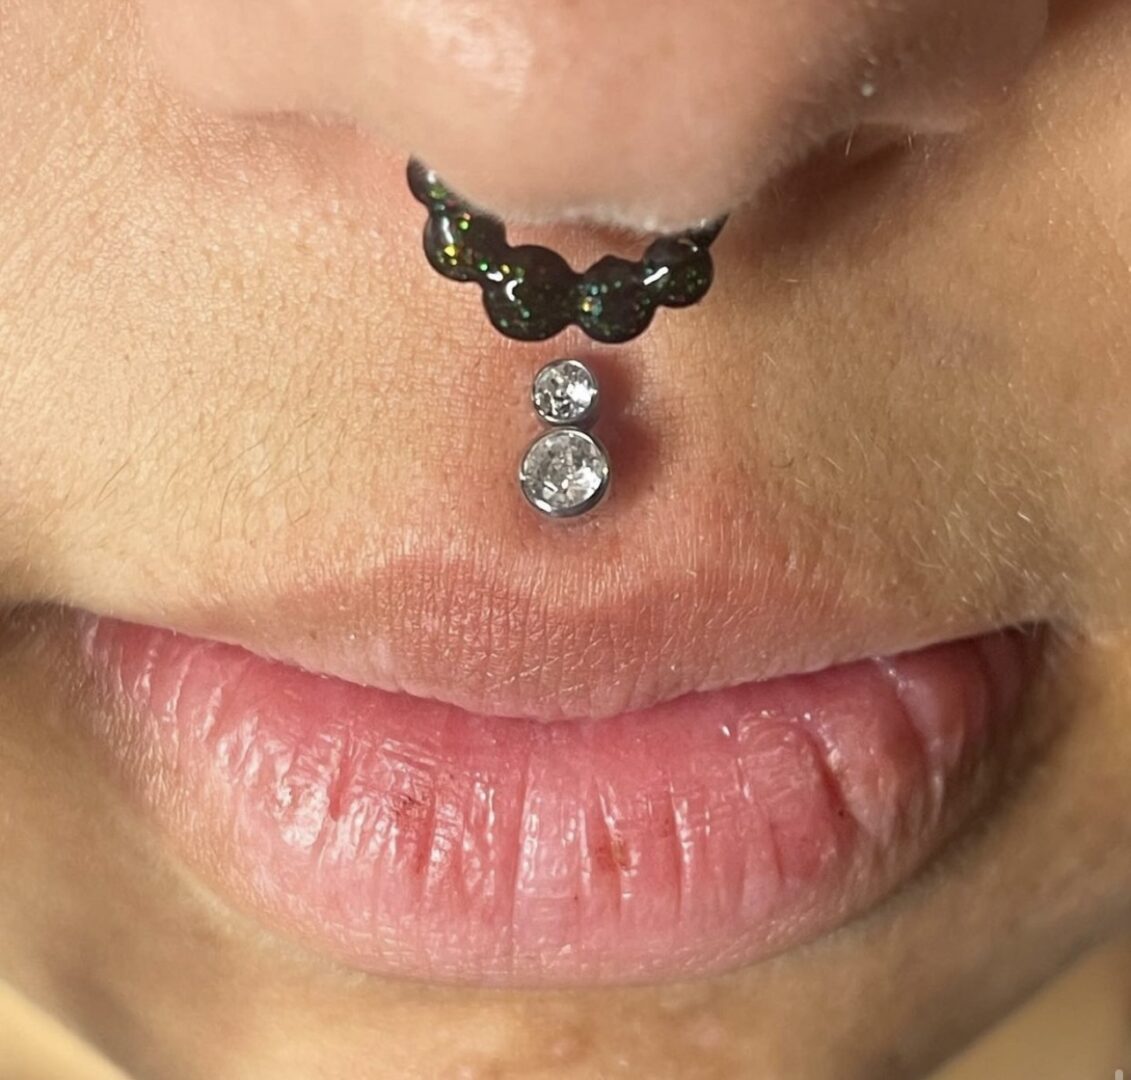 A woman with a piercing on her nose.